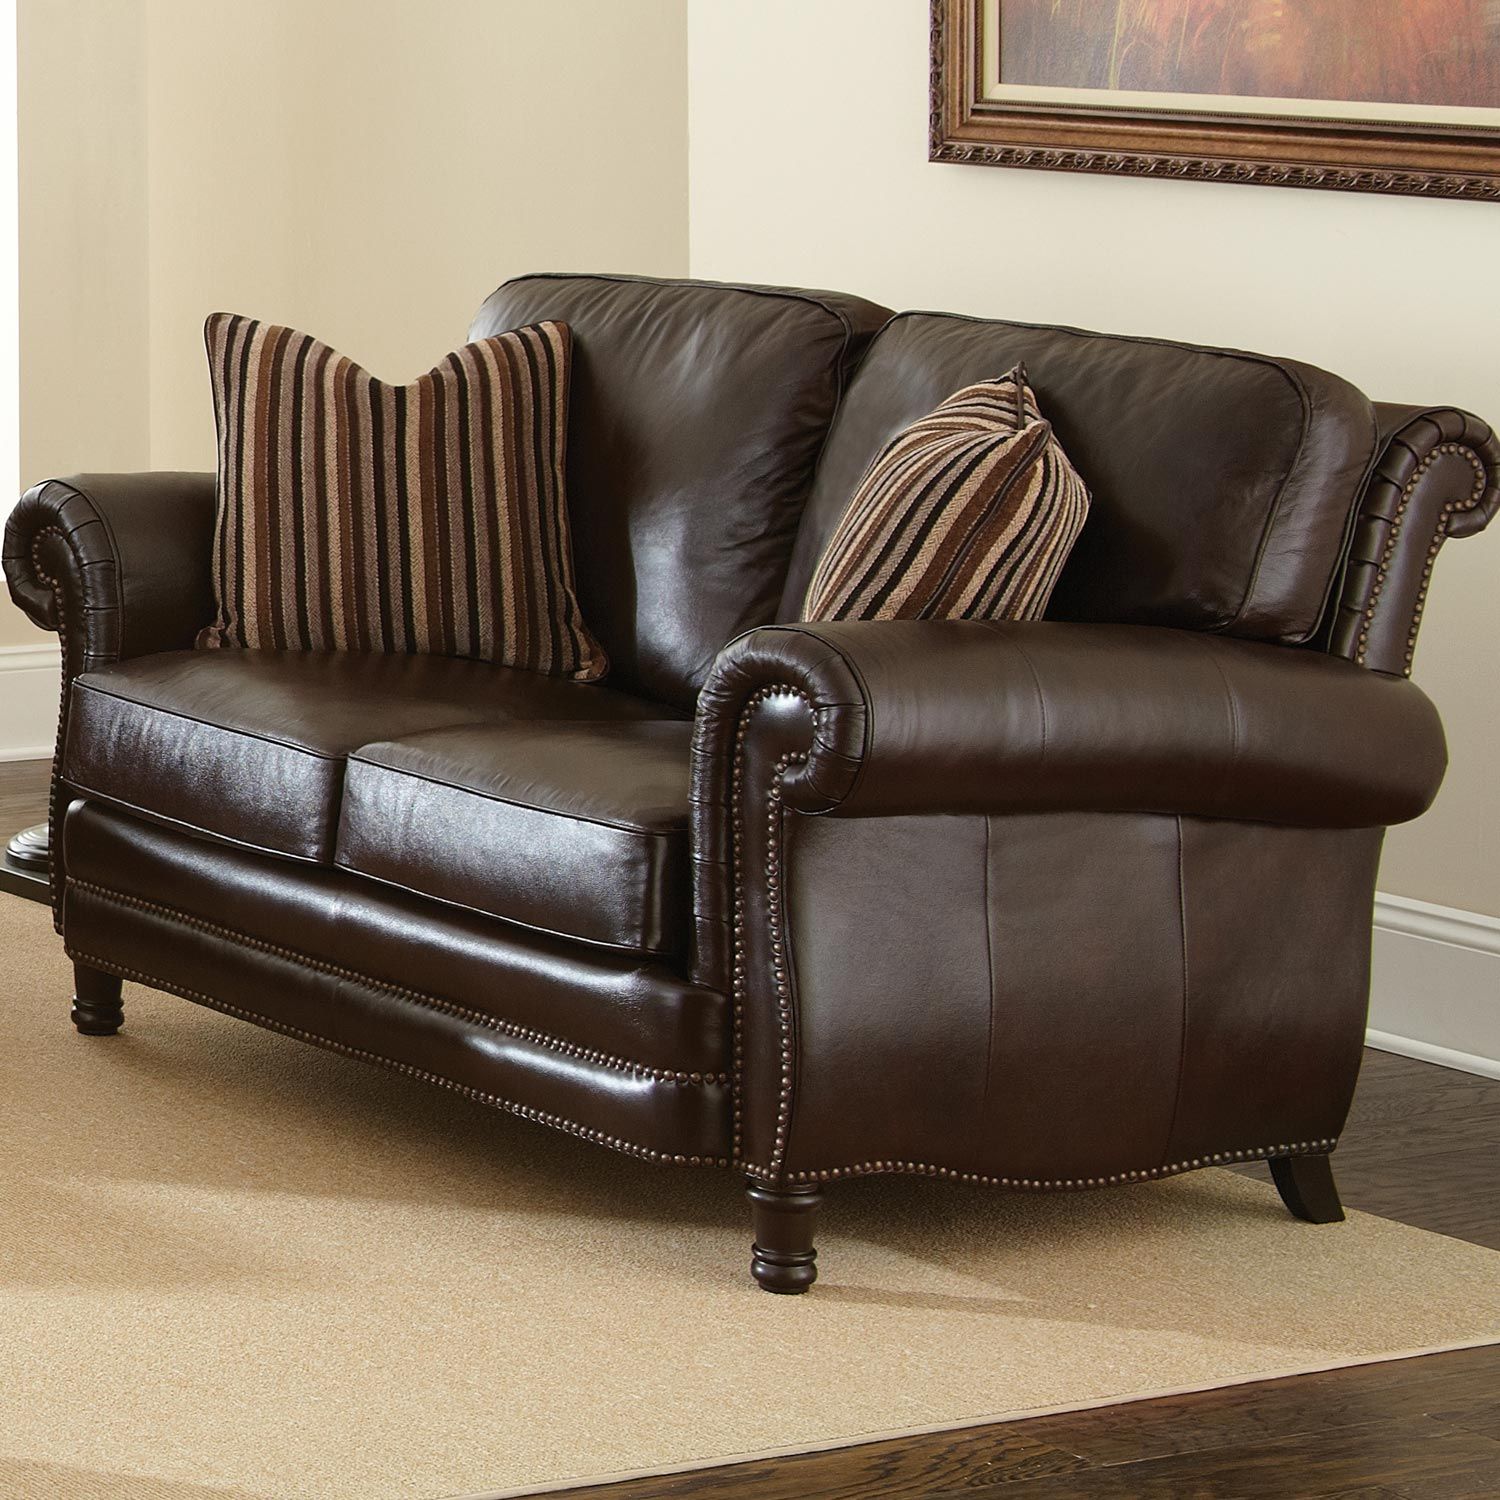 Chateau 3 Piece Leather Sofa Set – Antique Chocolate Brown | Dcg Stores With Faux Leather Sofas In Chocolate Brown (View 11 of 20)